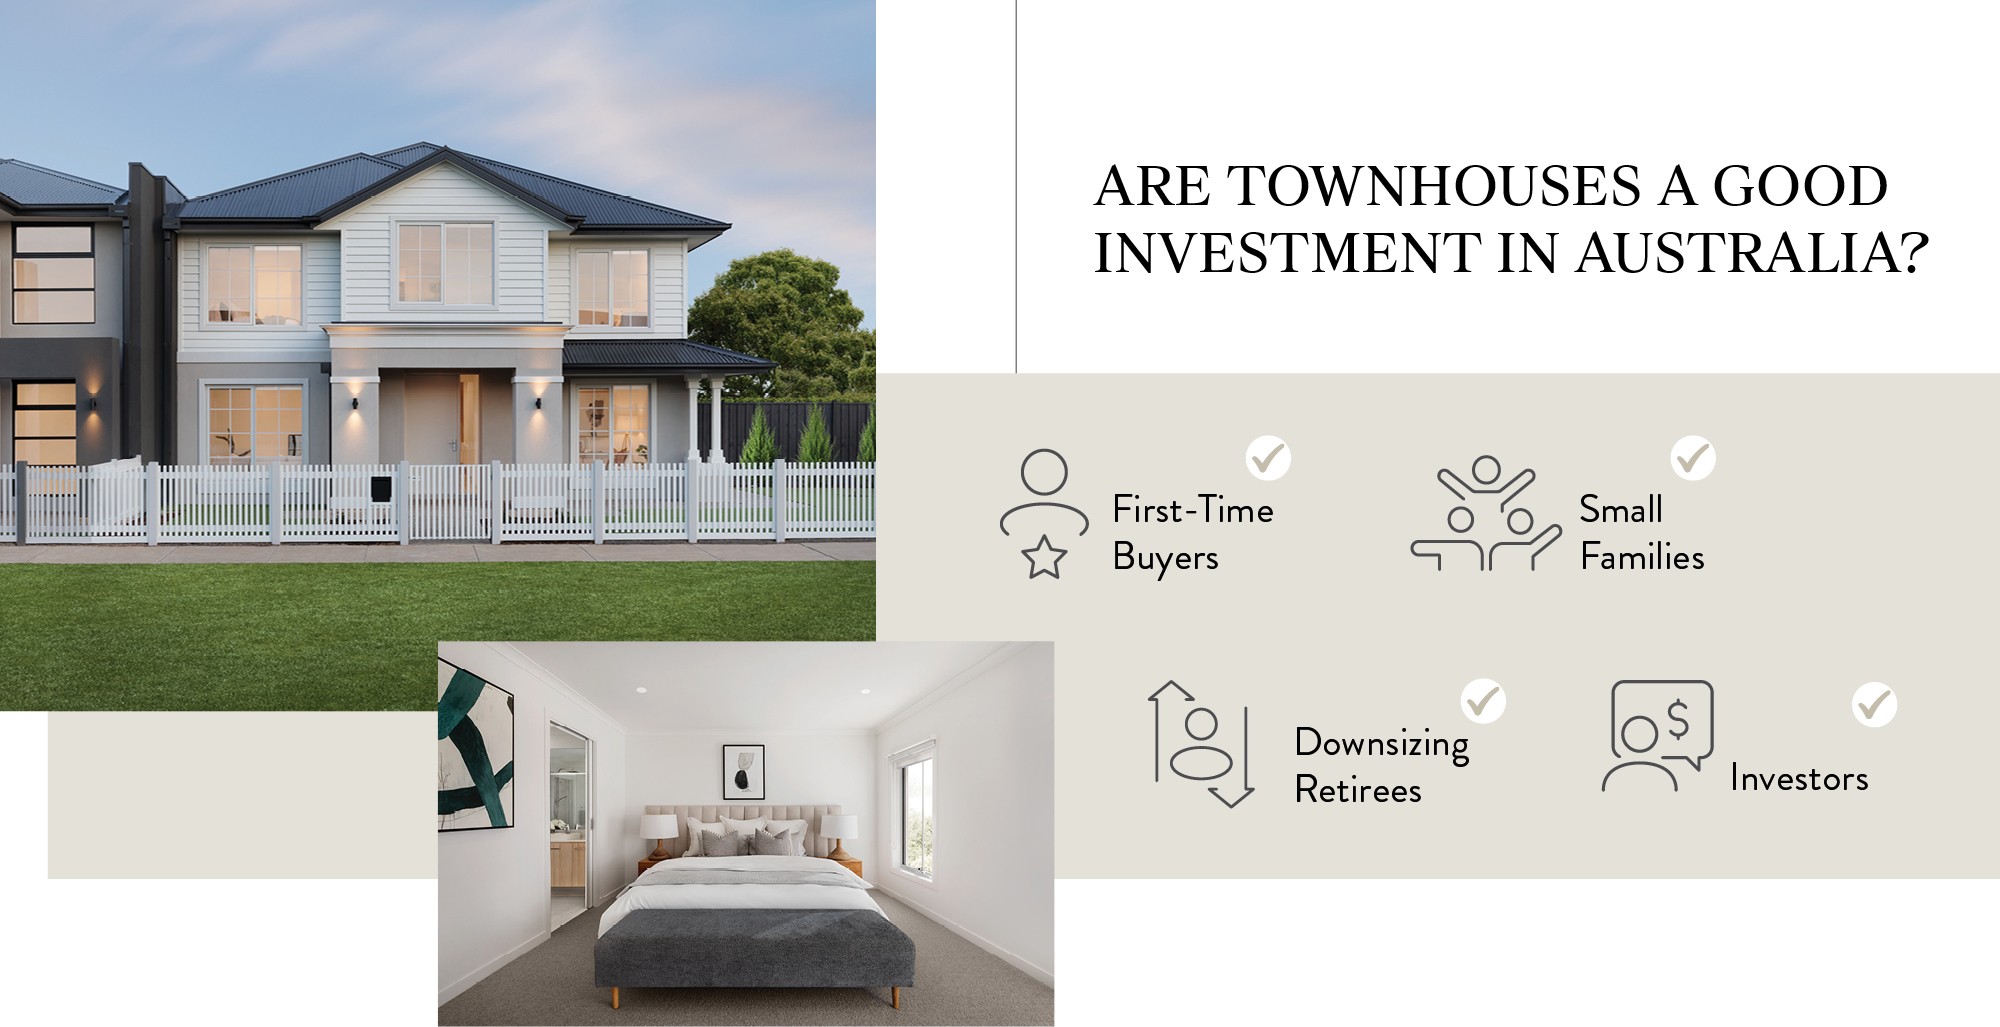 Is-townhouses-a-good-investment_body1.jpg